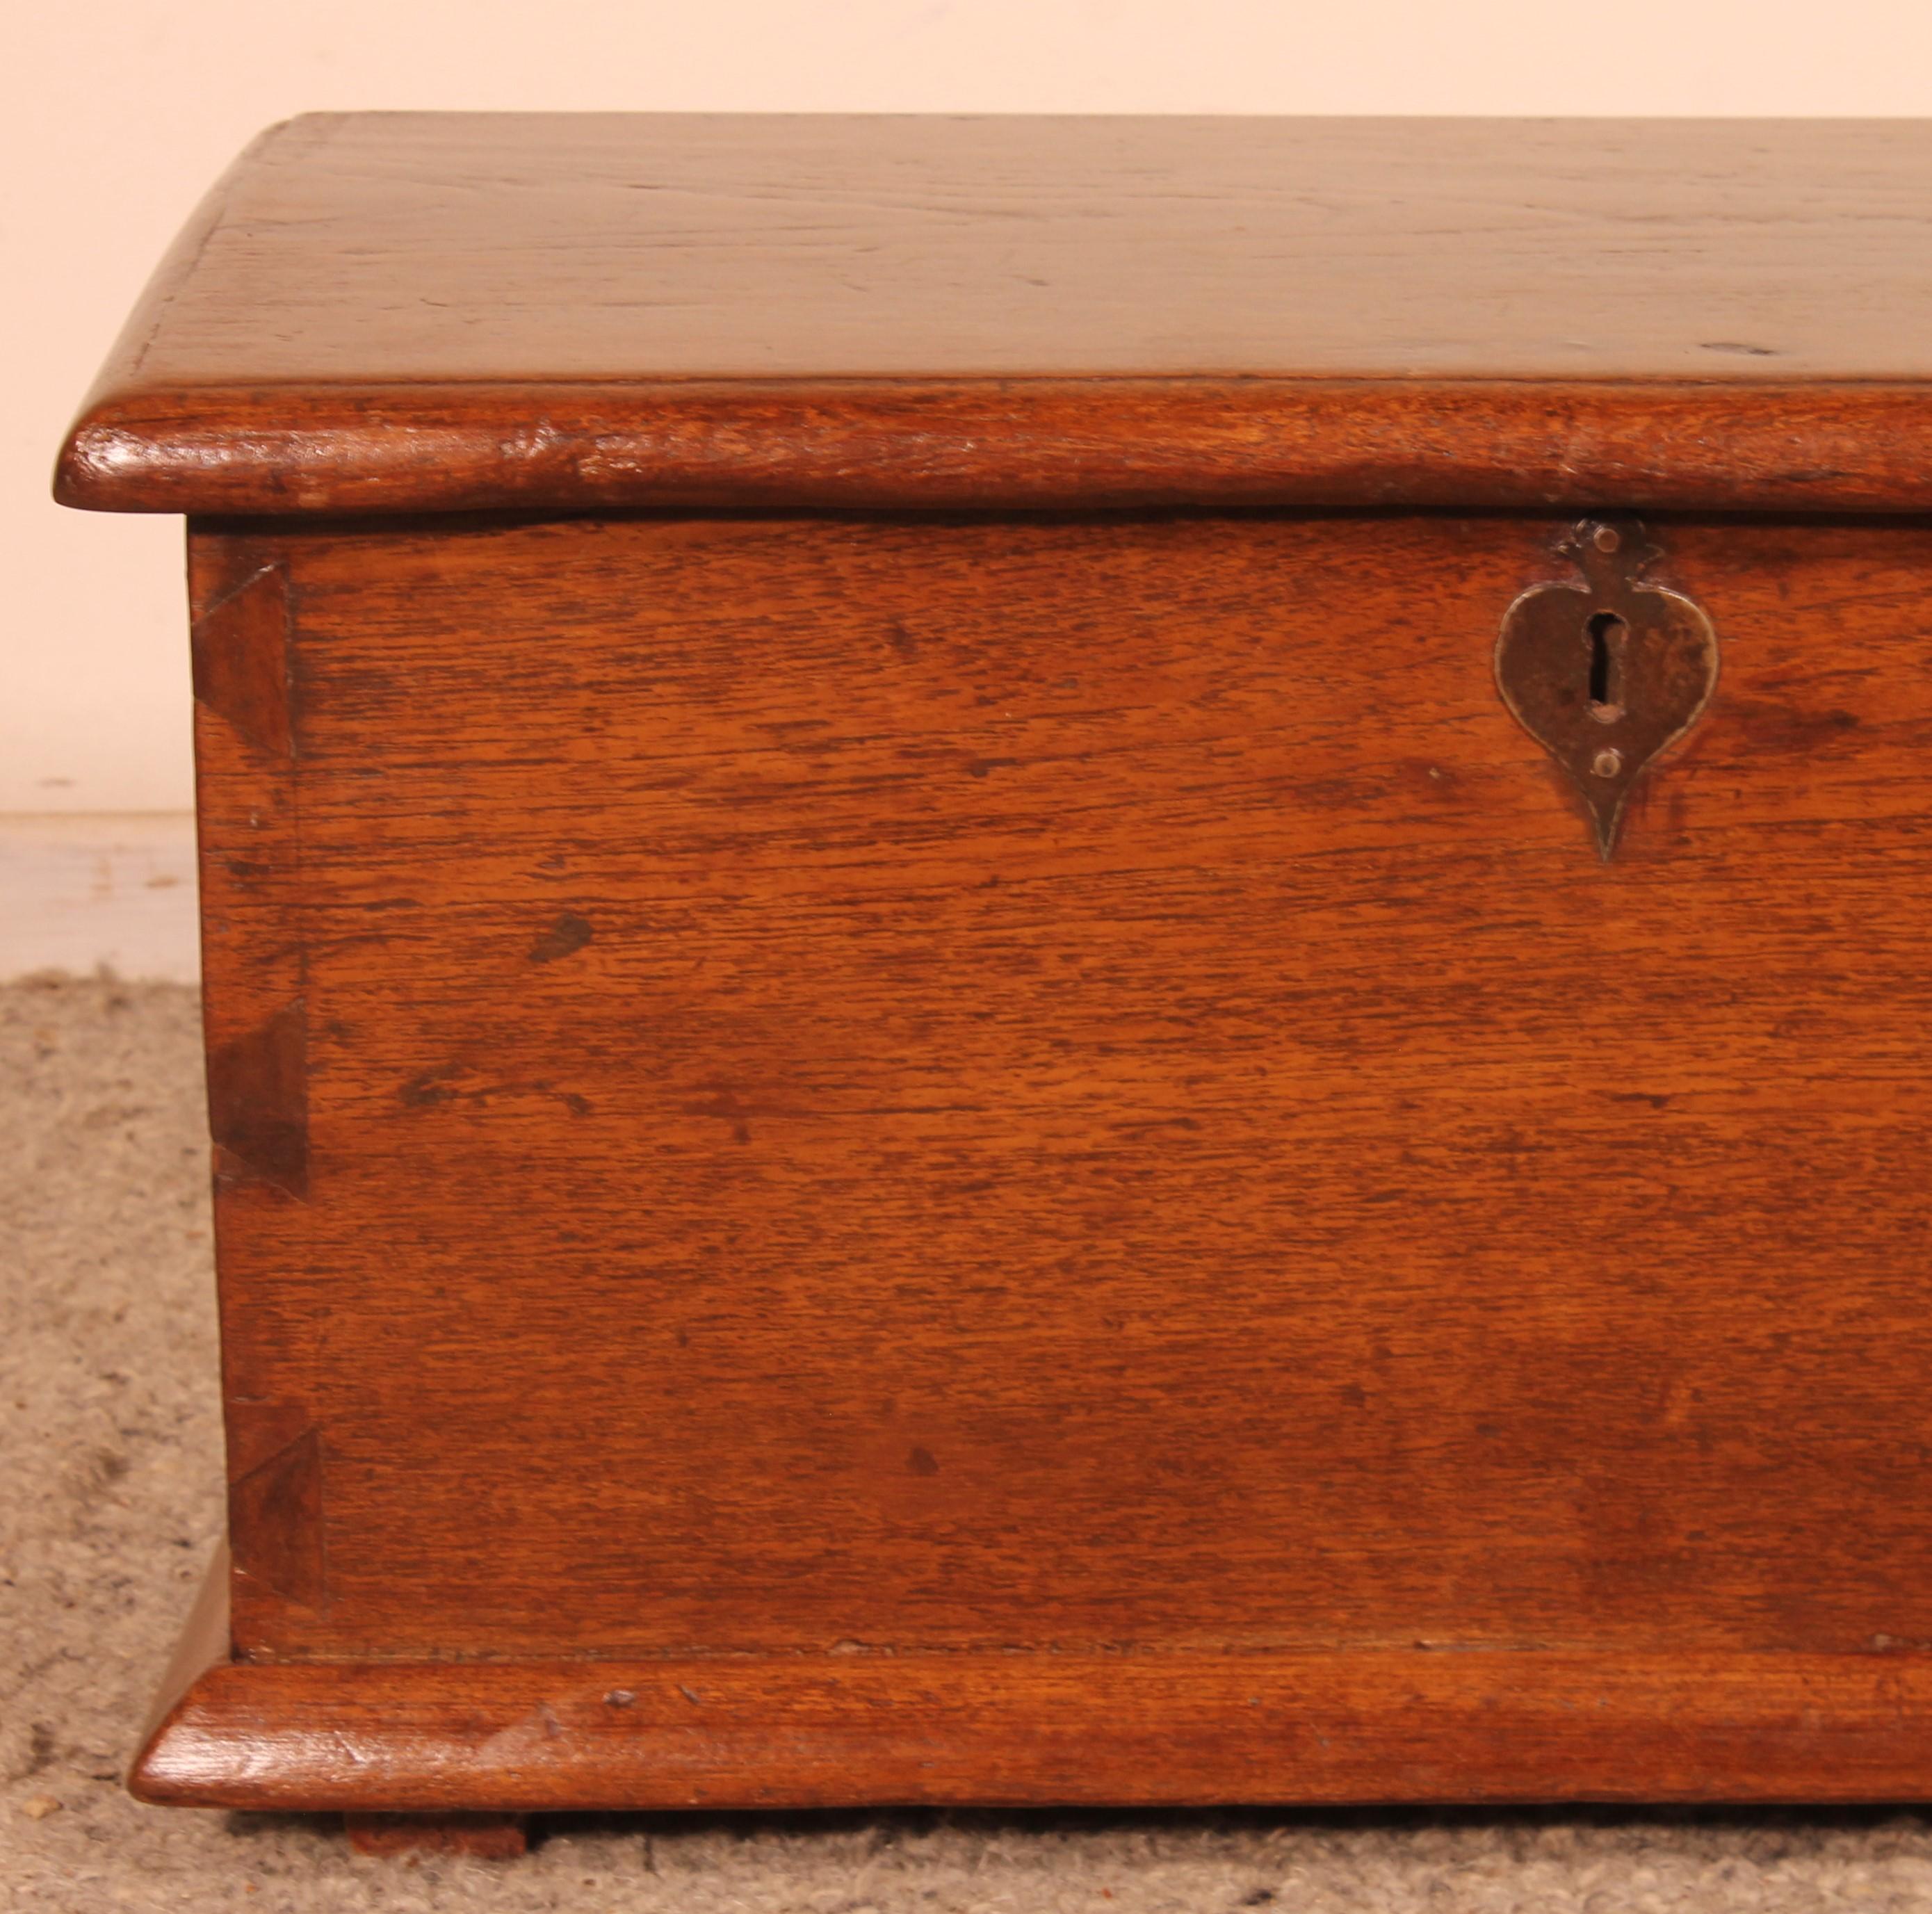 Lovely little colonial chest from the 18th century
Very beautiful little chest with very interesting dimensions since it's smaller than the usual chests
in perfect condition and with a very nice color
